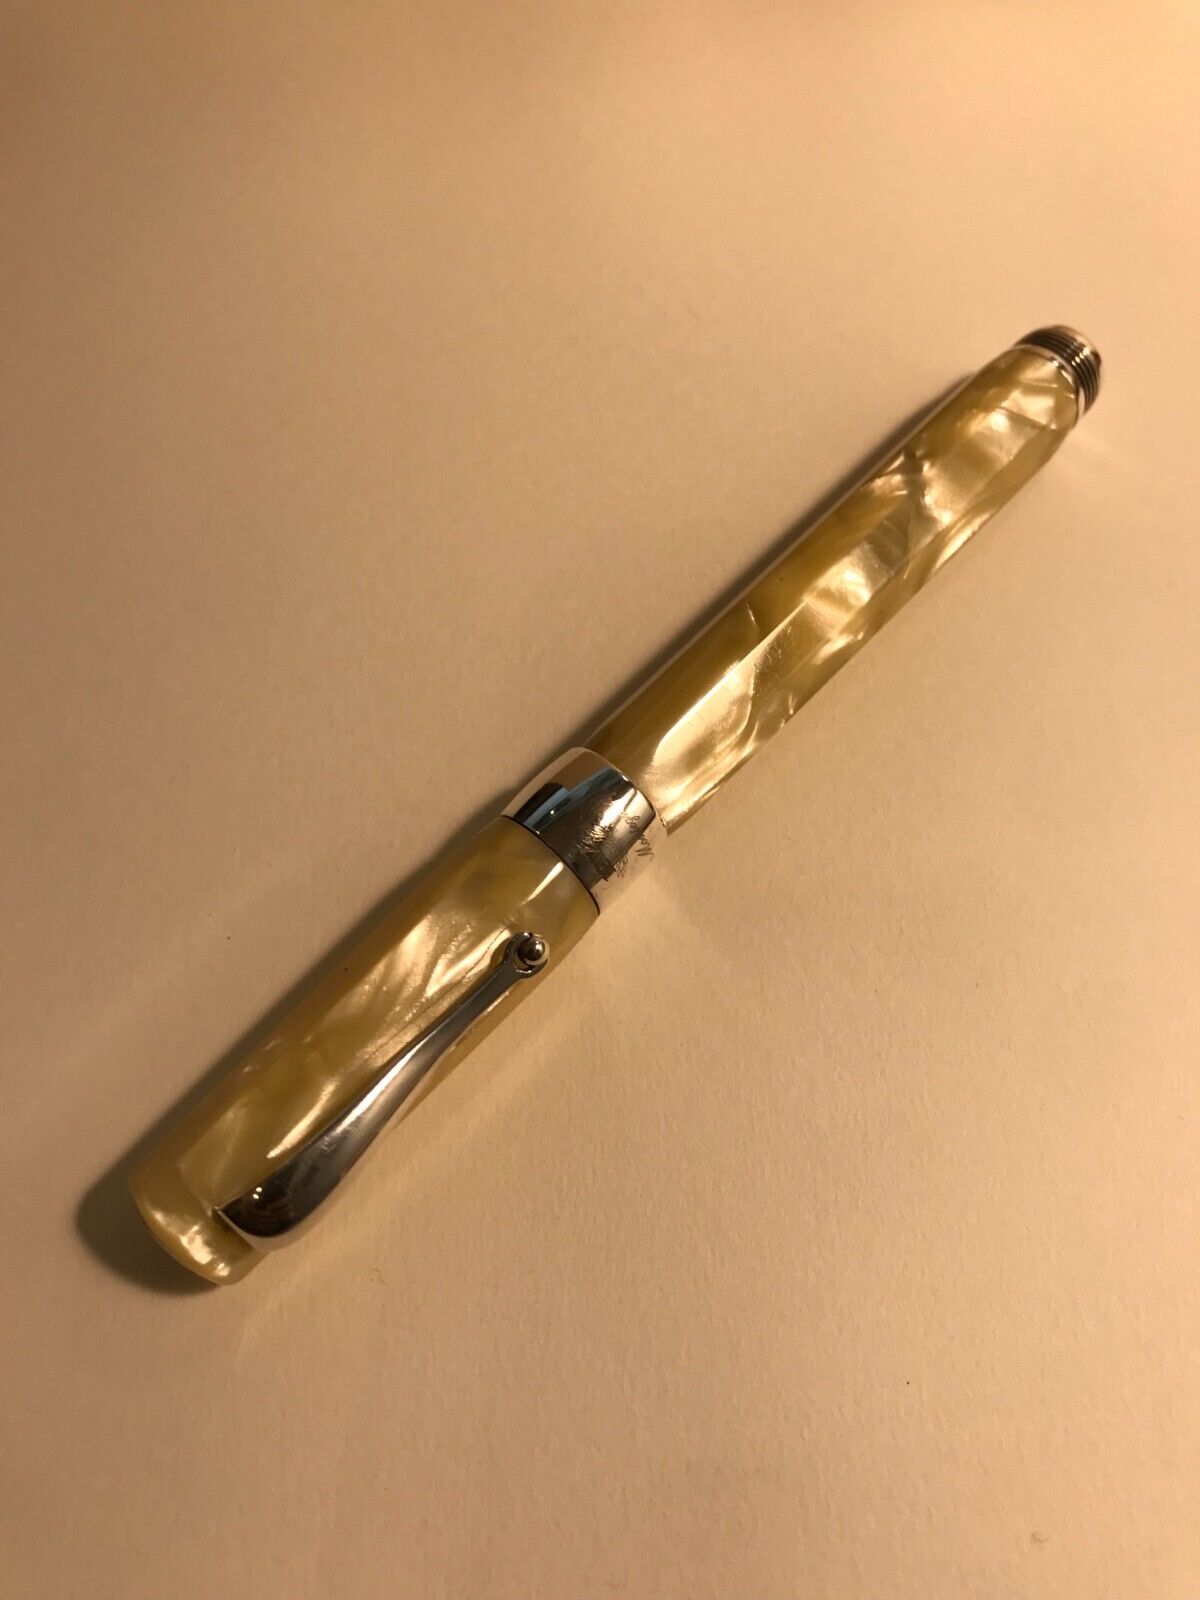 Montegrappa 1912 Ball Pen in Ivory Marble and Sterling Silver Trim